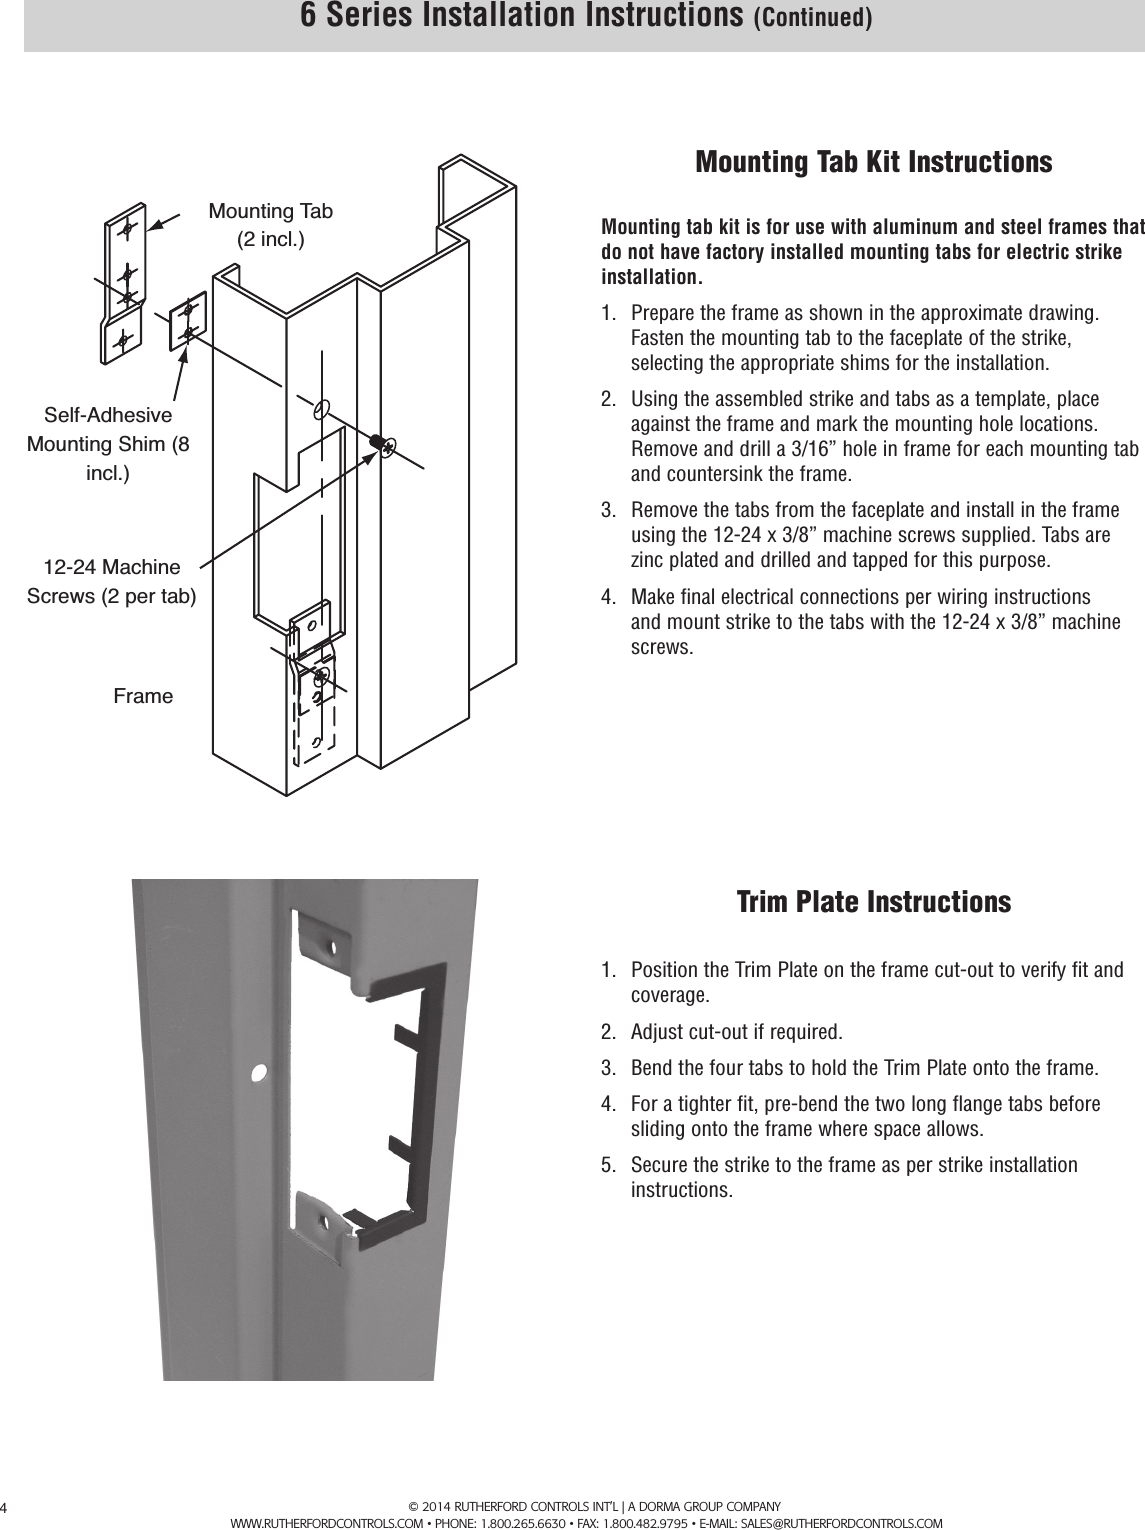 Page 4 of 6 - RCI  6 Series/7 Series Installation Instructions IS6A R0614